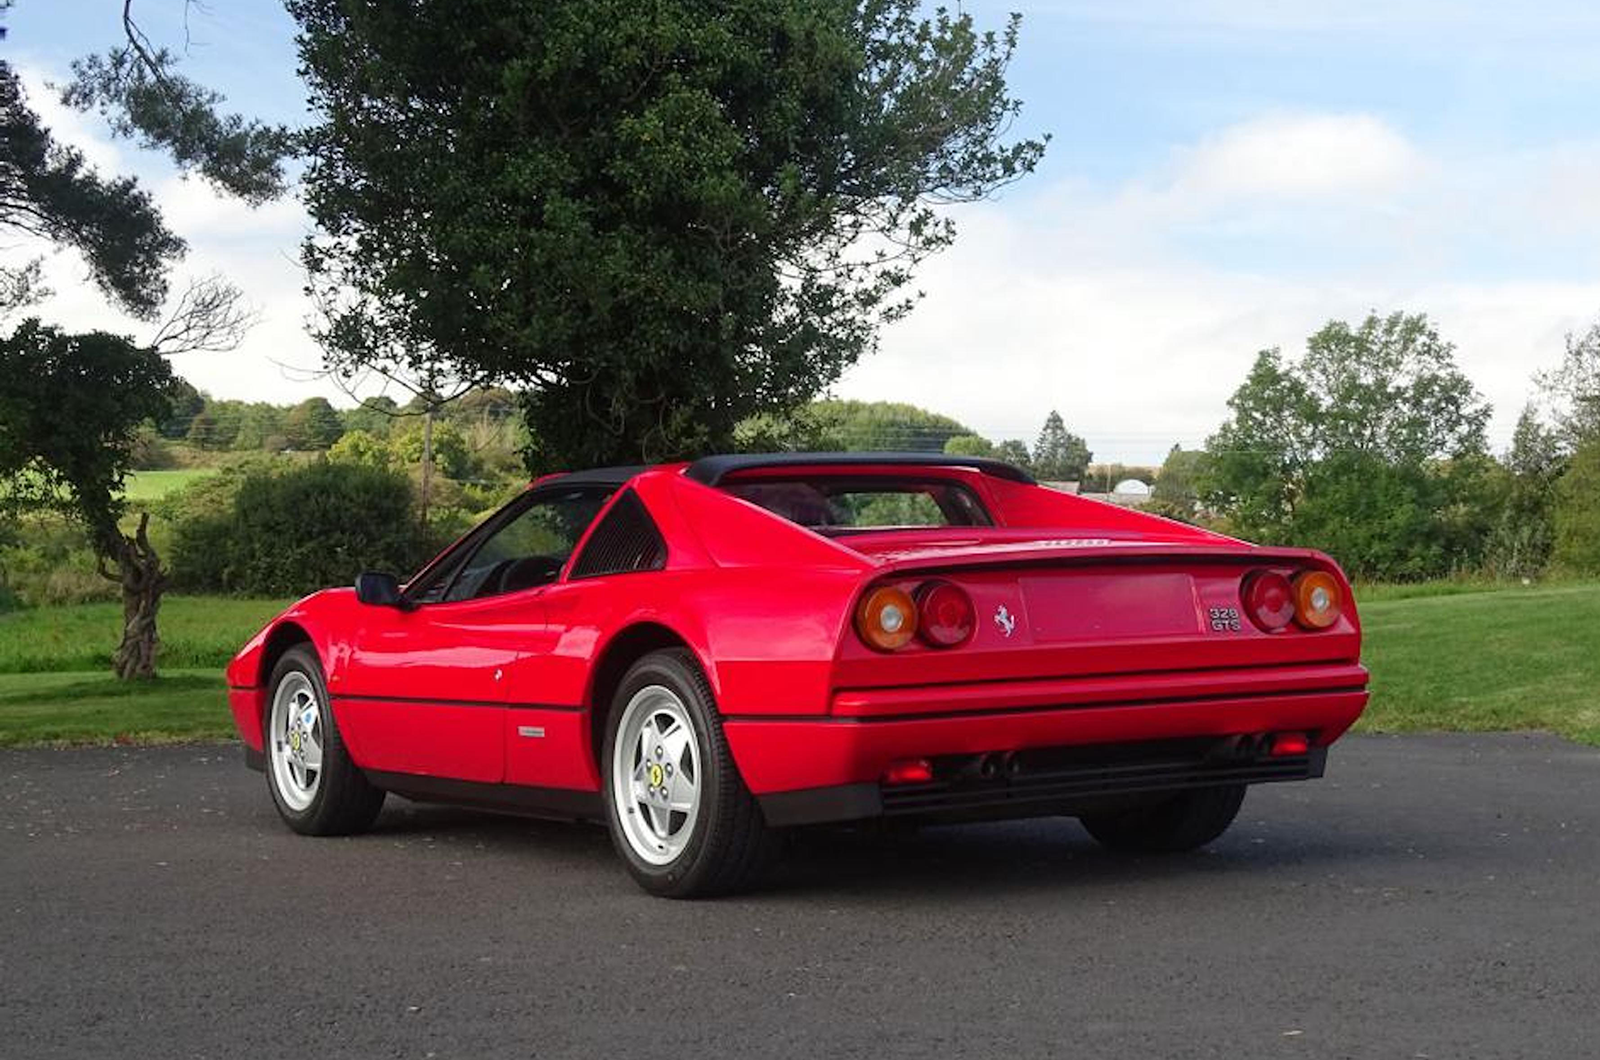 Classic & Sports Car – Timewarp Ferraris do exist – and they don’t have to cost millions